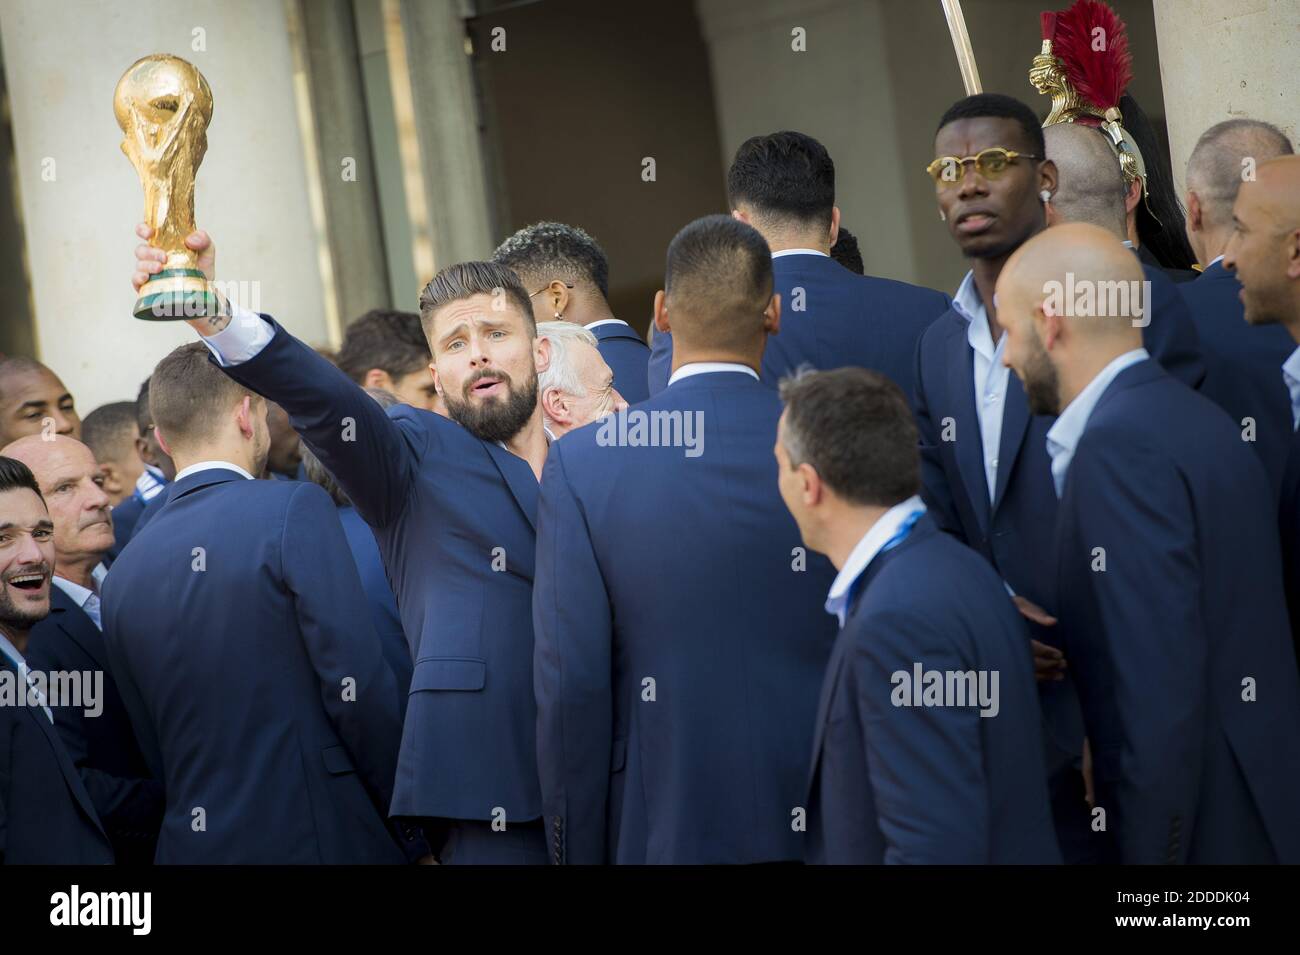 Olivier Giroud holds the trophy during a reception at the Elysee Presidential Palace on July 16, 2018 in Paris, France, after French players won the Russia 2018 World Cup final football match. France celebrated their second World Cup win 20 years after their maiden triumph on July 15, 2018, overcoming a passionate Croatia side 4-2 in one of the most gripping finals in recent history. Photo by Eliot Blondet/ABACAPRESS.COM Stock Photo